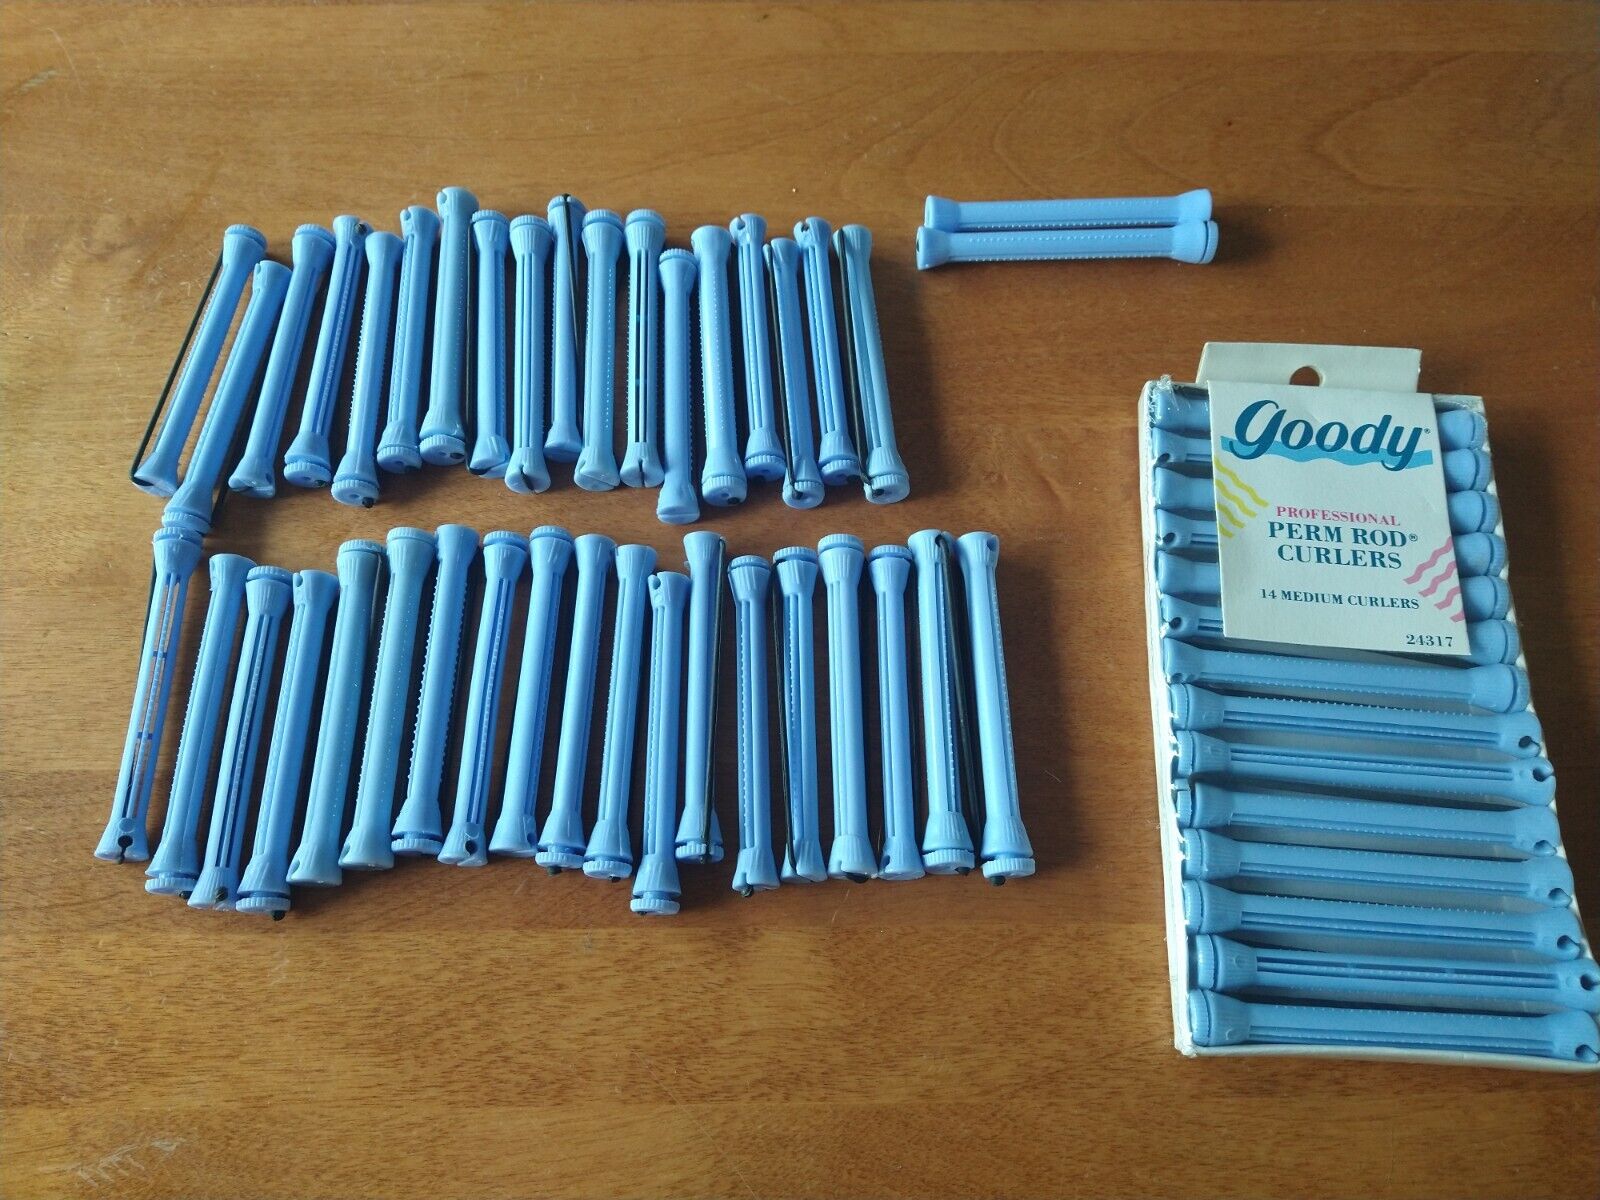 Vintage 1989 Goody Professional Perm Rod 14 Pk Blue Curlers Plus Extra (53 Rods)